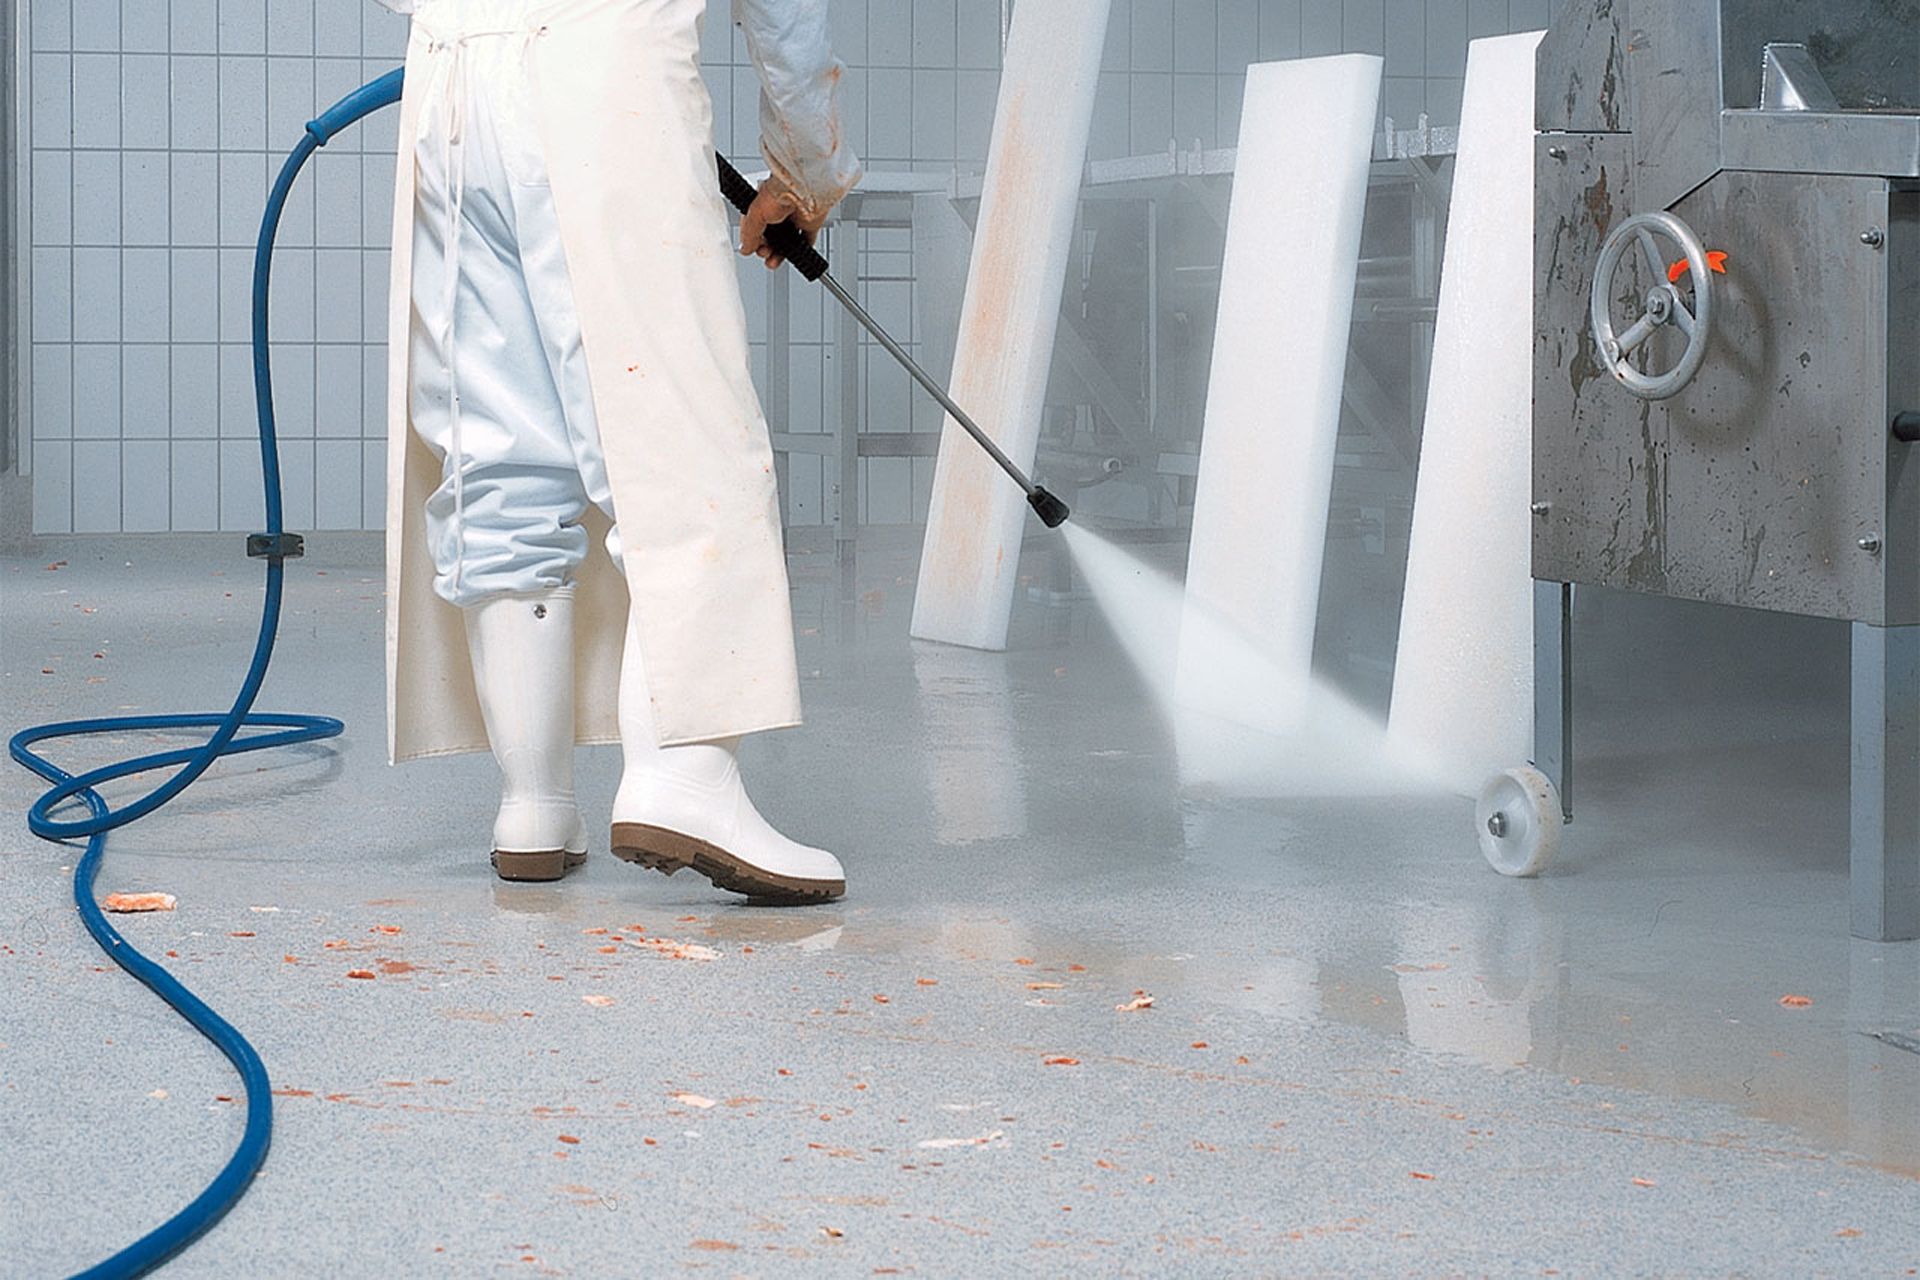 http://sika.scene7.com/is/image/sika/glo-worker-power-wash-cleaning-floor?wid=1920&hei=1280&fit=crop%2C1